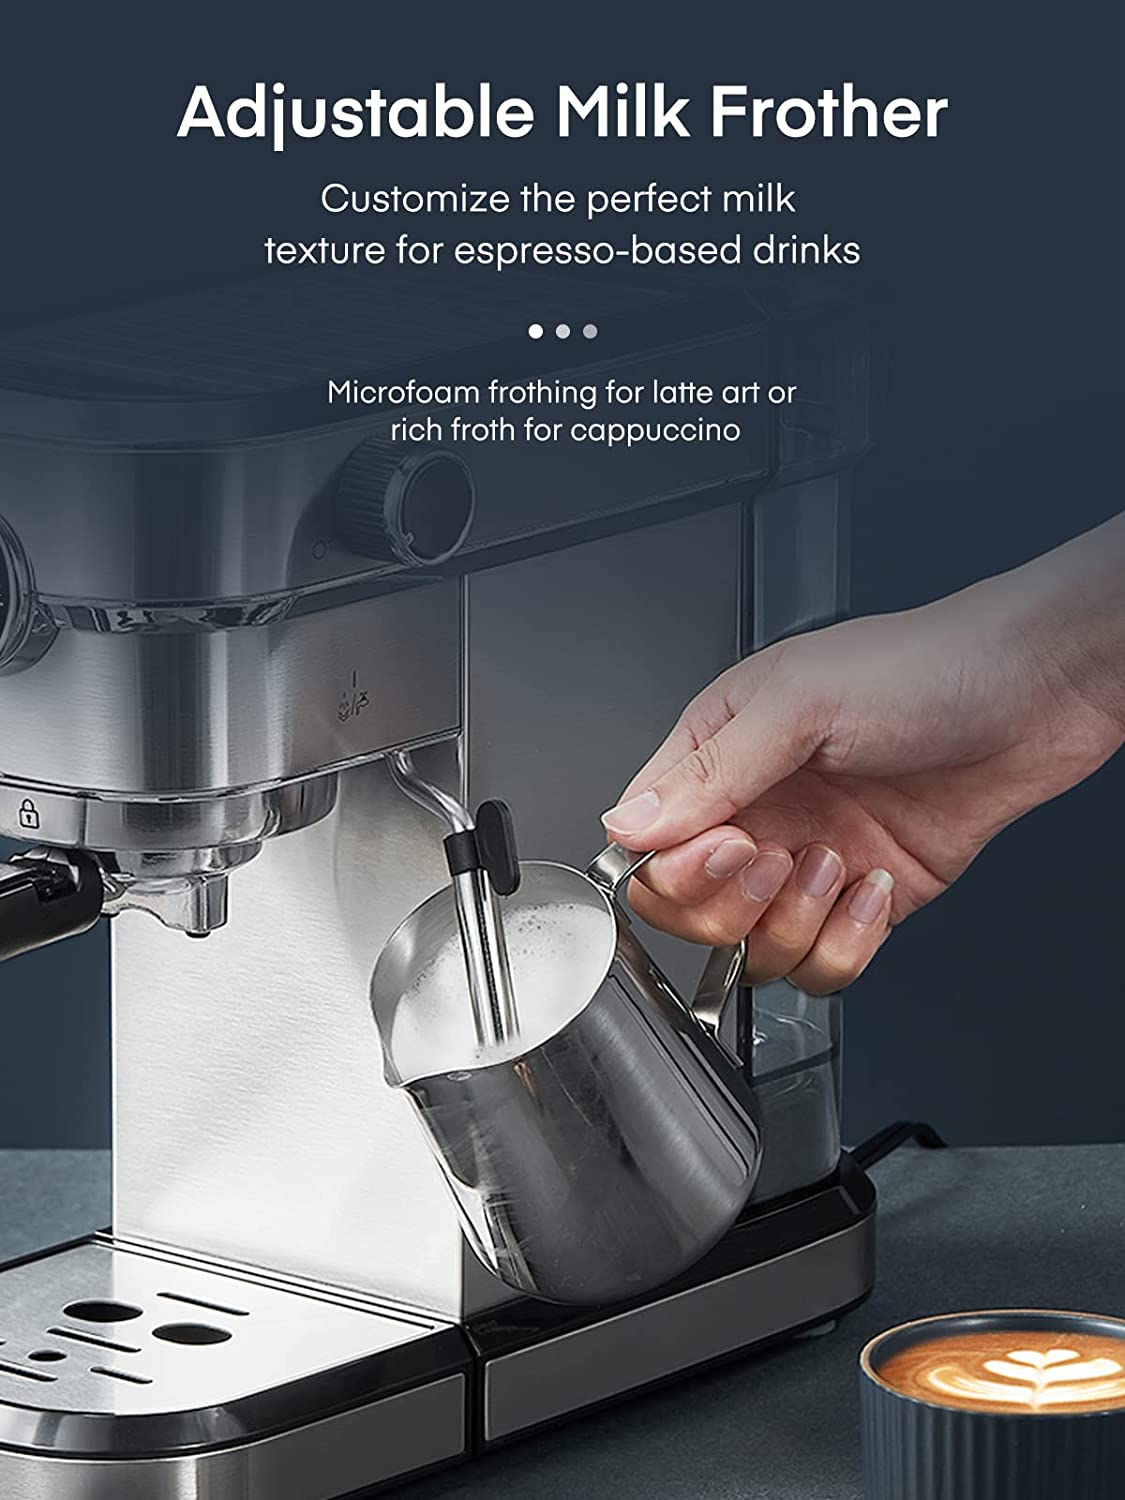 adjustable milk frother, FOHERE Espresso Machine, 15 Bar Espresso and Cappuccino Maker with Milk Frother Steam Wand, Professional Compact Coffee Machine for Espresso, Cappuccino, Latte and Mocha, Brushed Stainless Steel